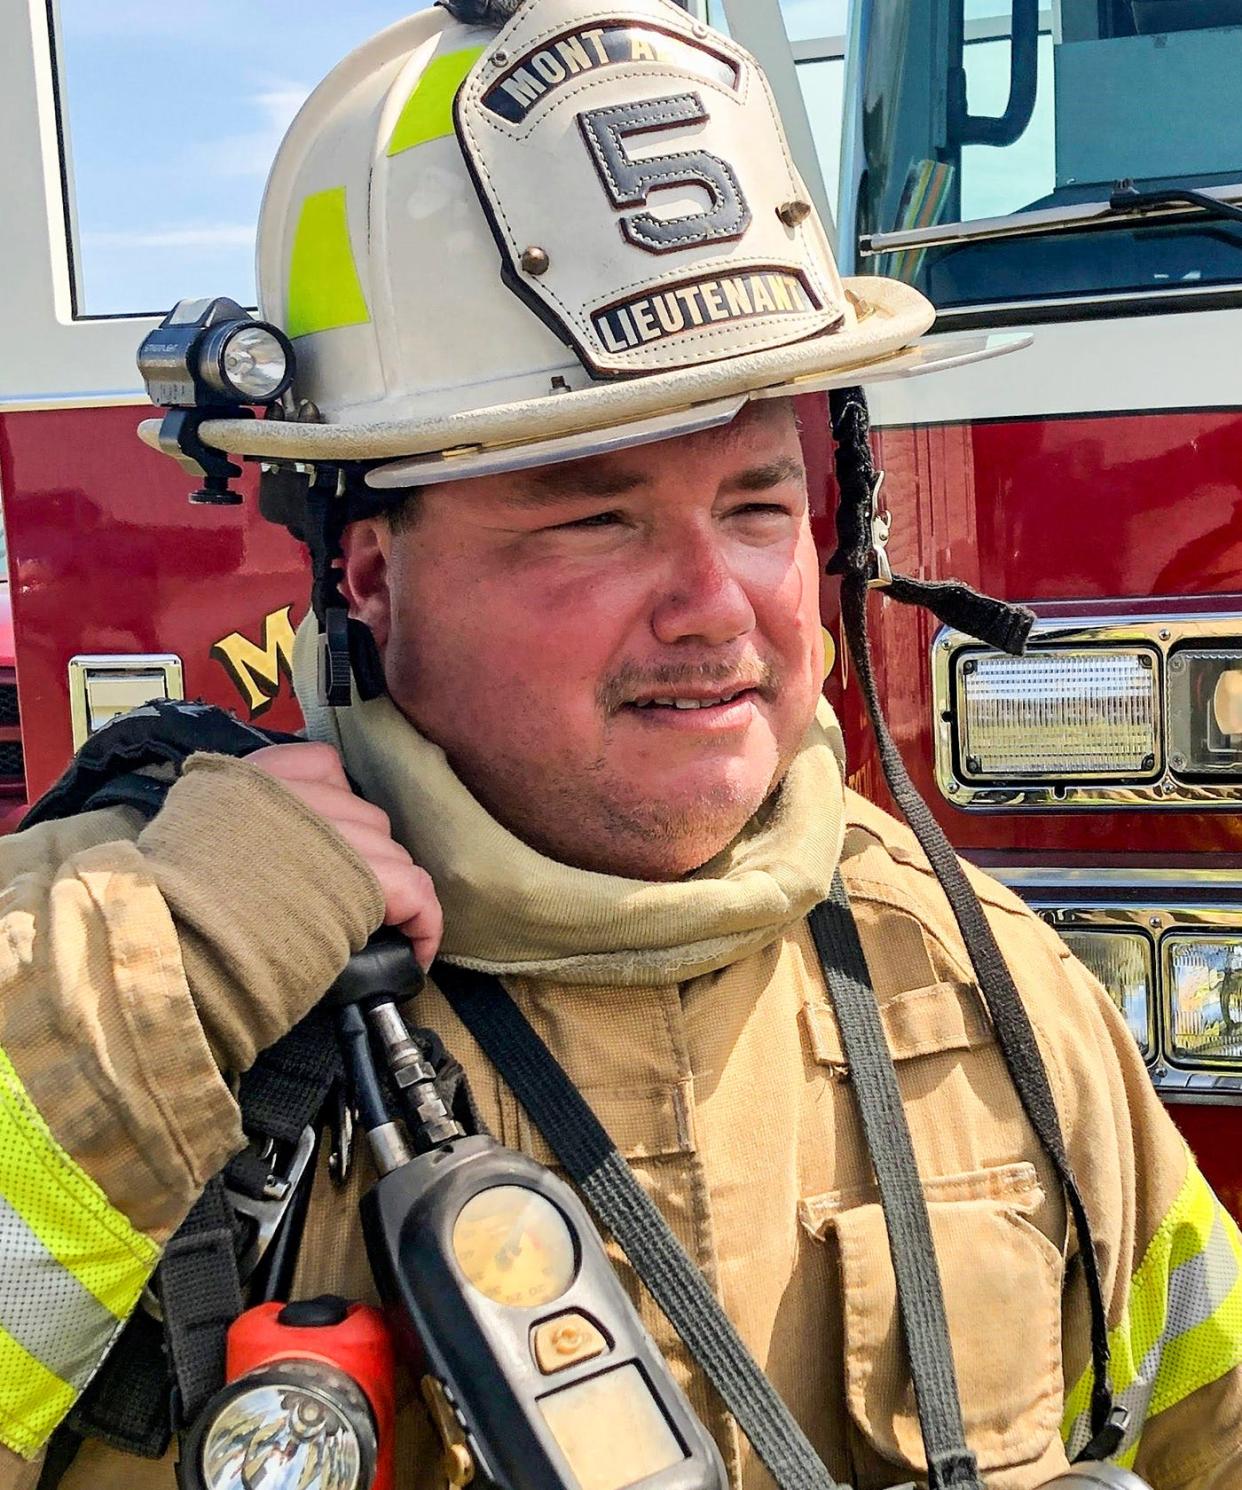 Mont Alto volunteer Brian Keith Martinez will be honored during the 43rd National Fallen Firefighters Memorial Weekend Saturday and Sunday, May 4 and 5, at National Emergency Training Center in Emmitsburg, Md